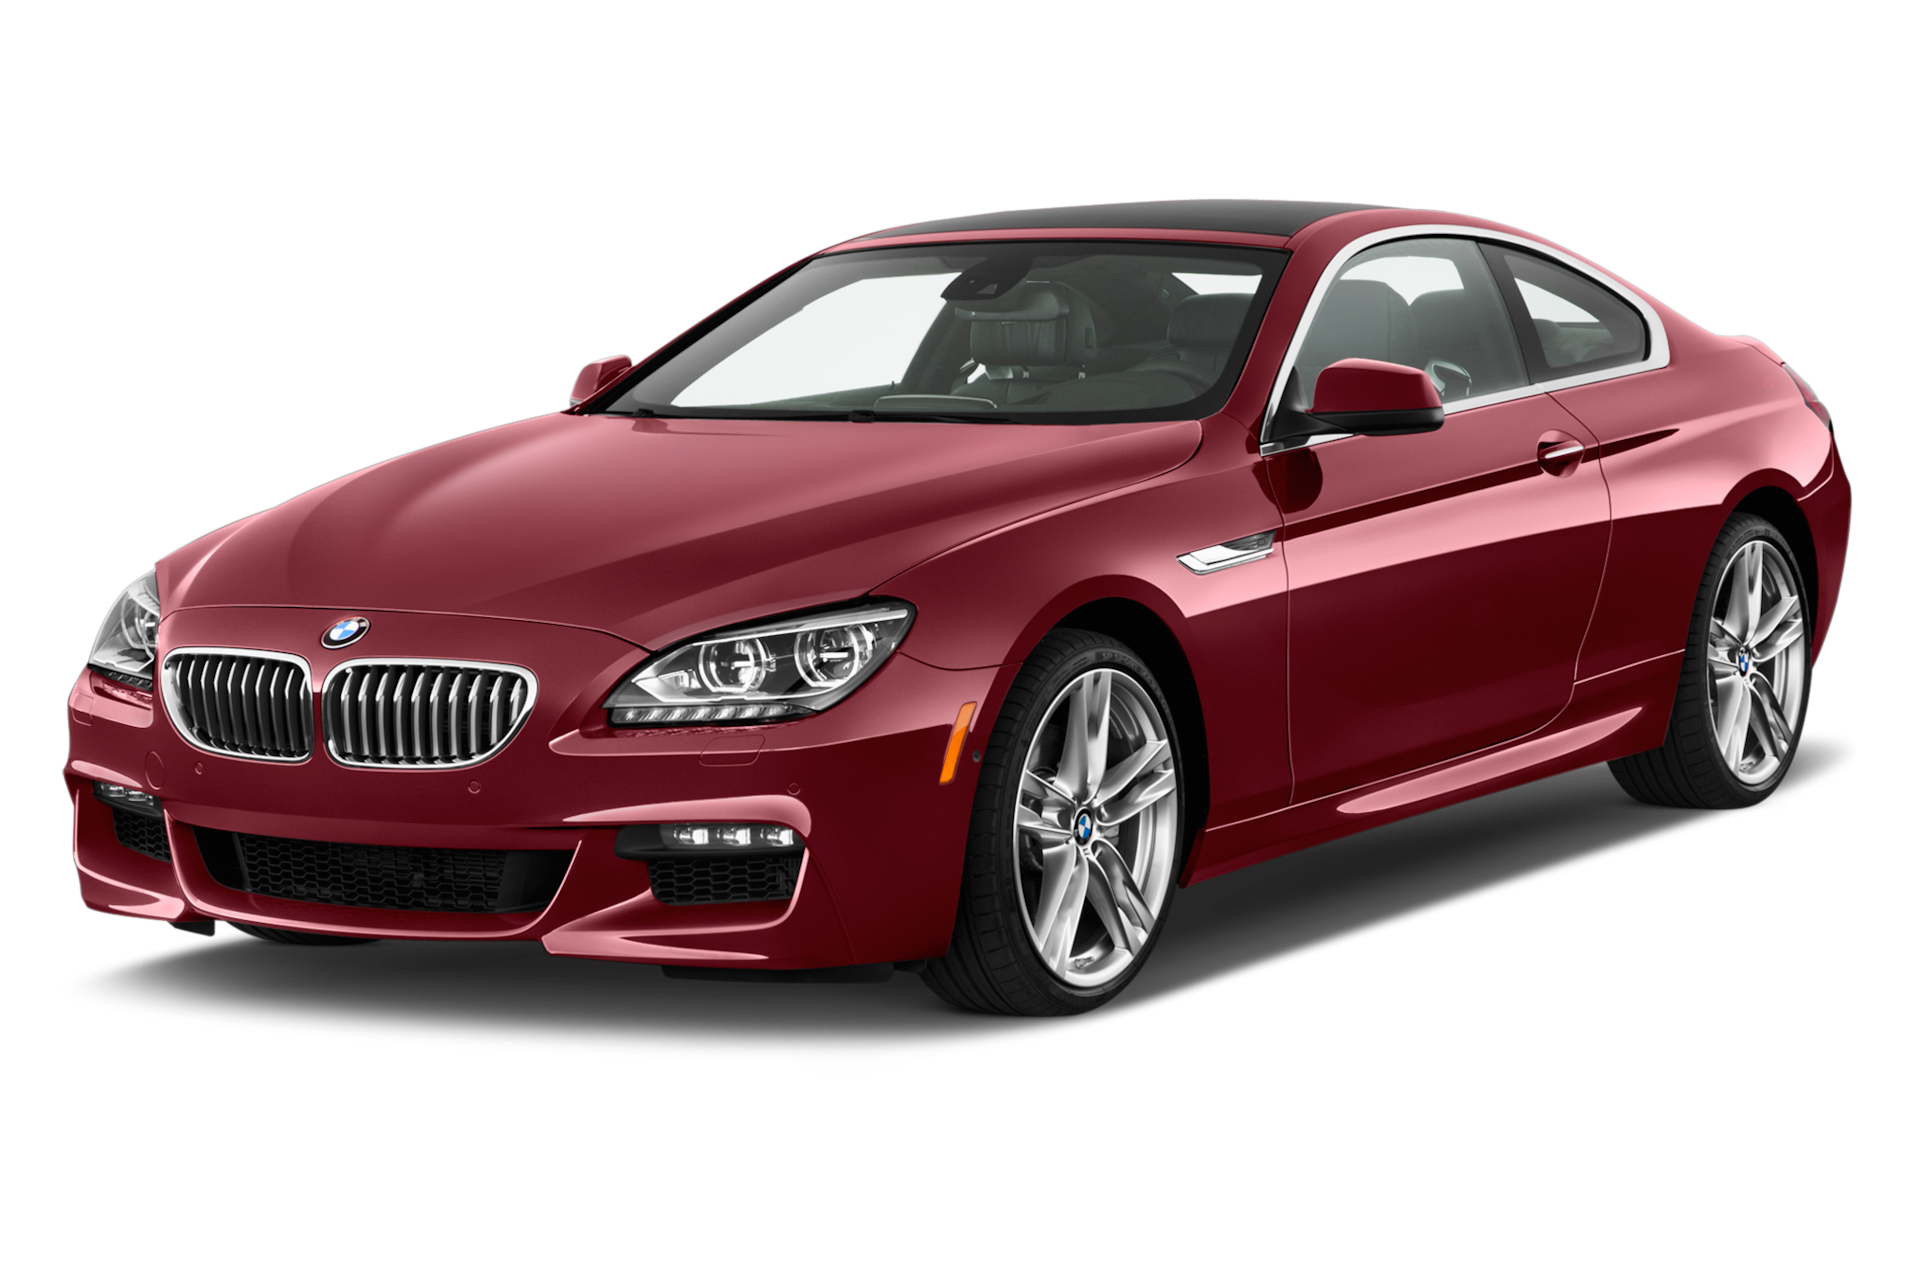 2014 BMW 6-Series Prices, Reviews, and Photos - MotorTrend